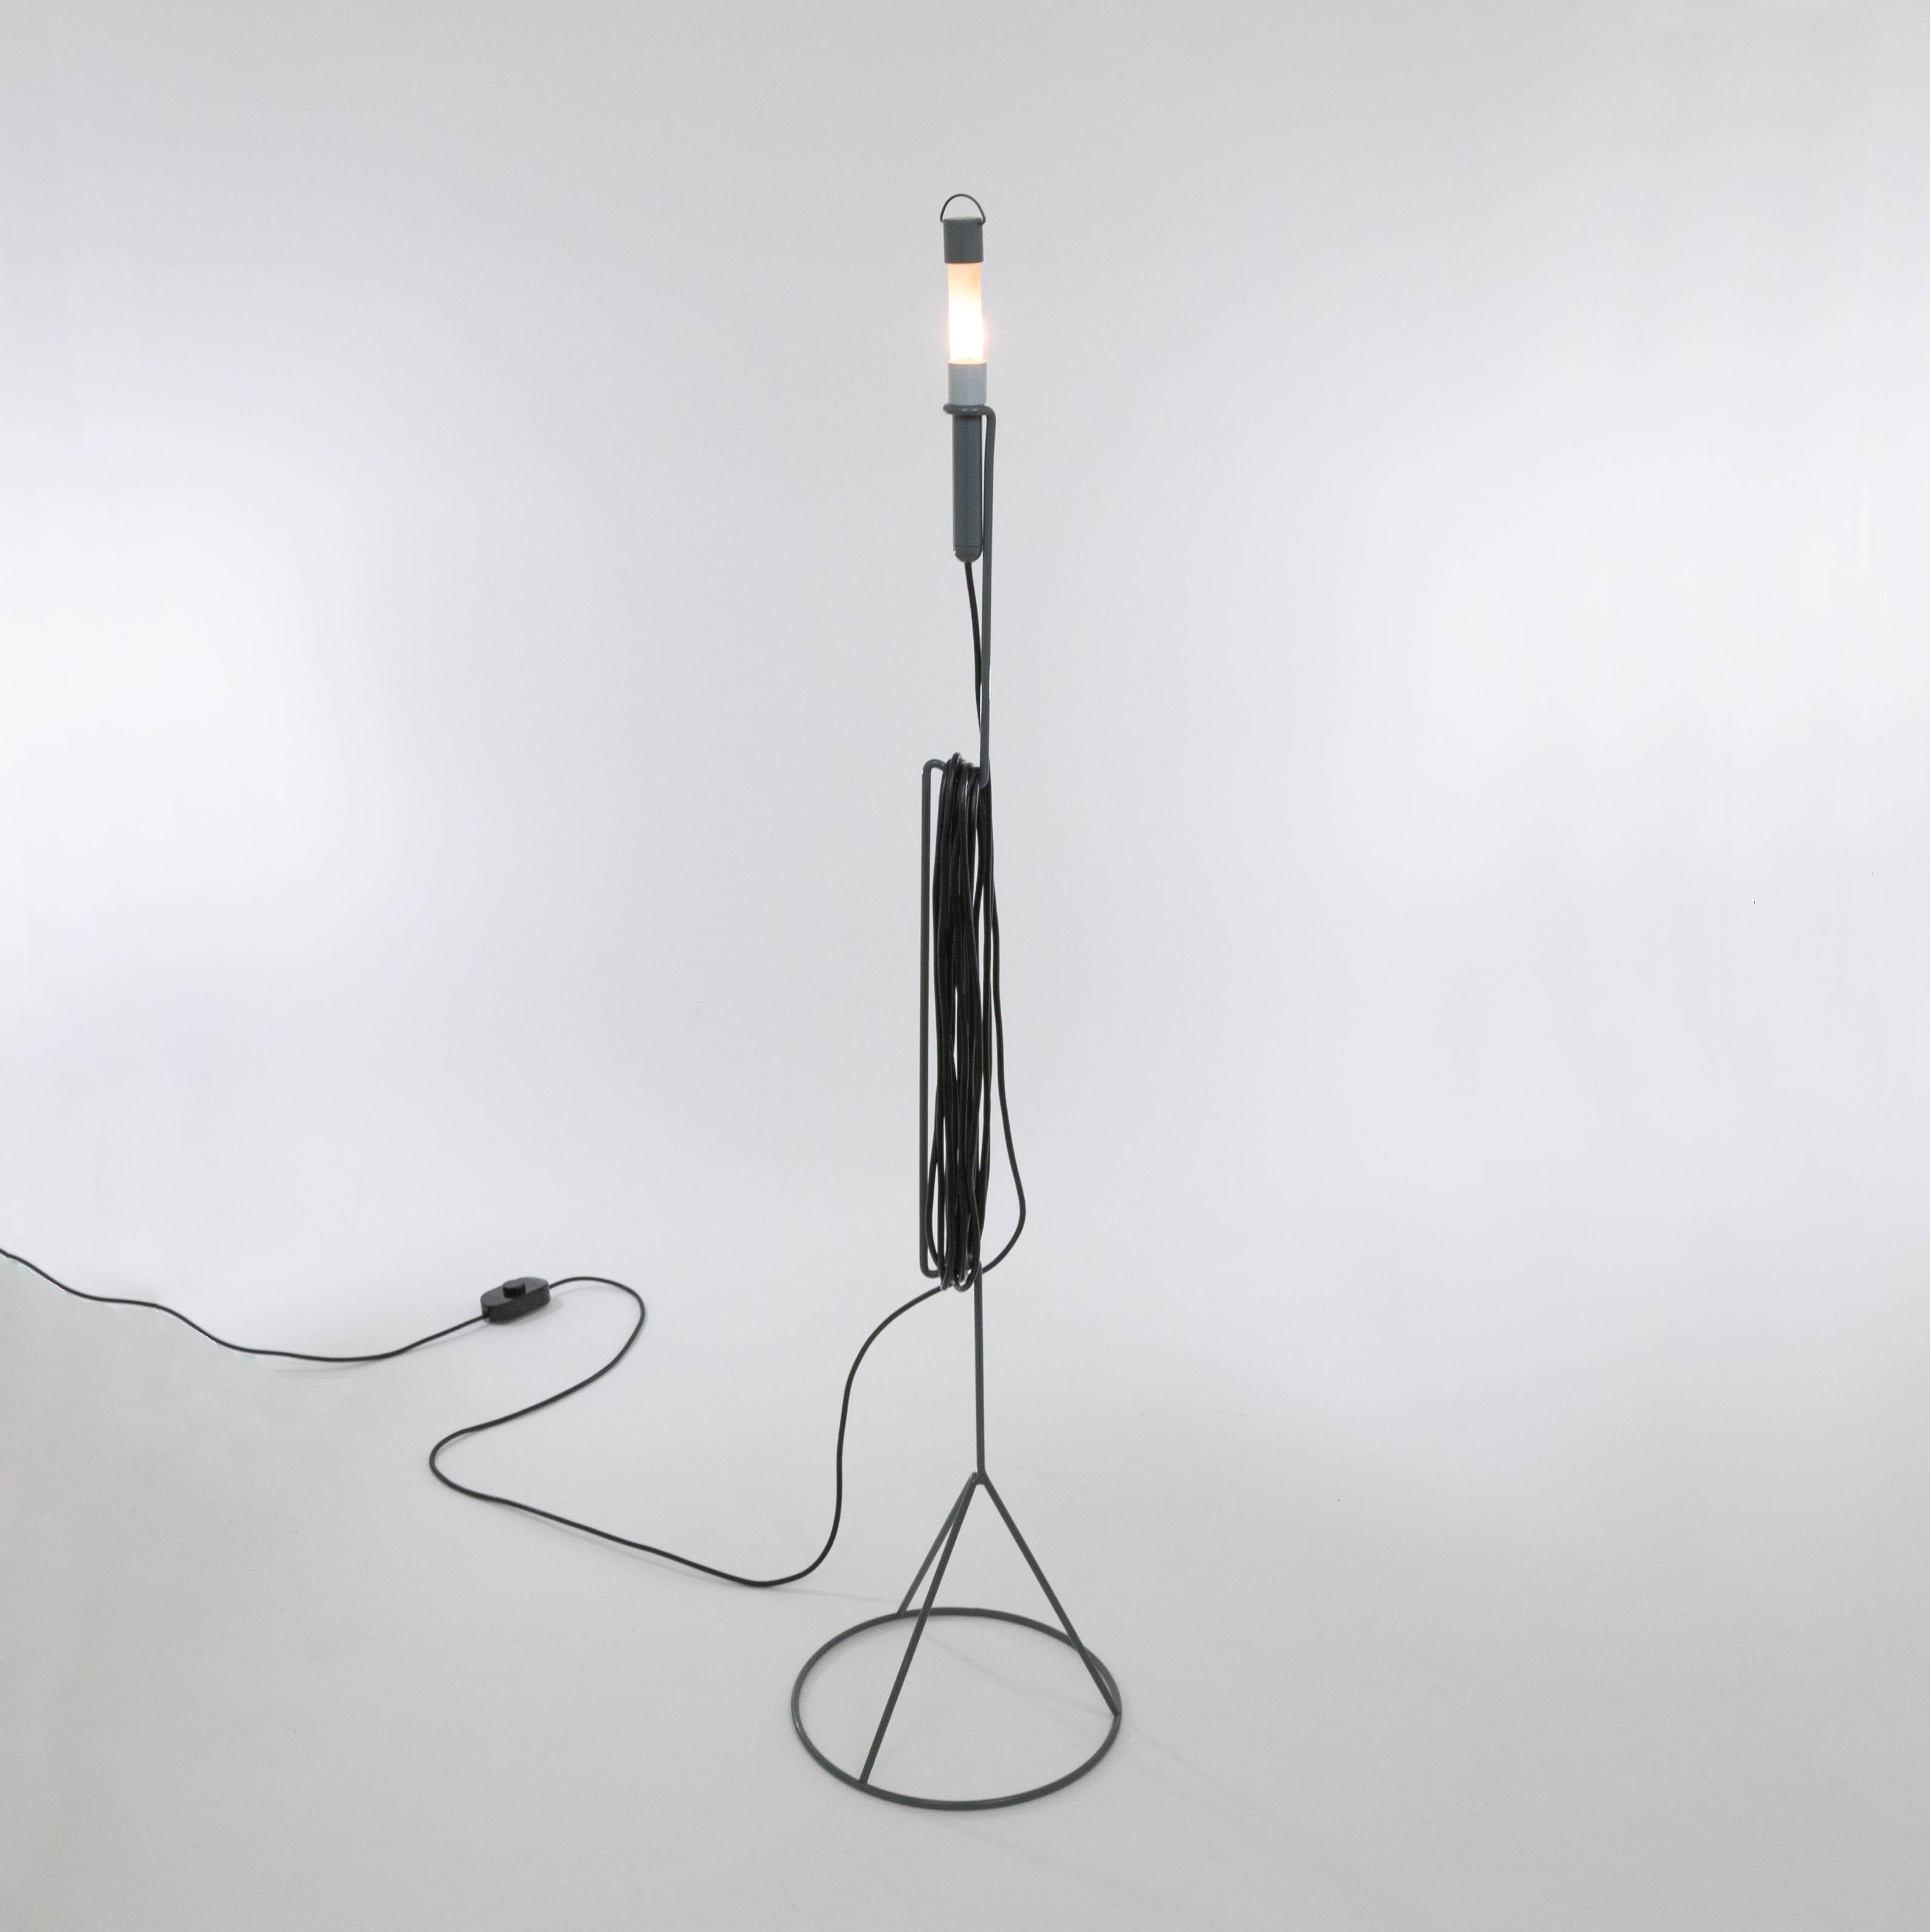 Edy floor lamp designed by Piero Castiglioni for Fontana Arte in 1982.

Besides a floor lamp, the Edy series of low-voltage lamps consisted of a hanging lamp, a wall lamp and a table lamp, each with a different metal frame.

The main part of the